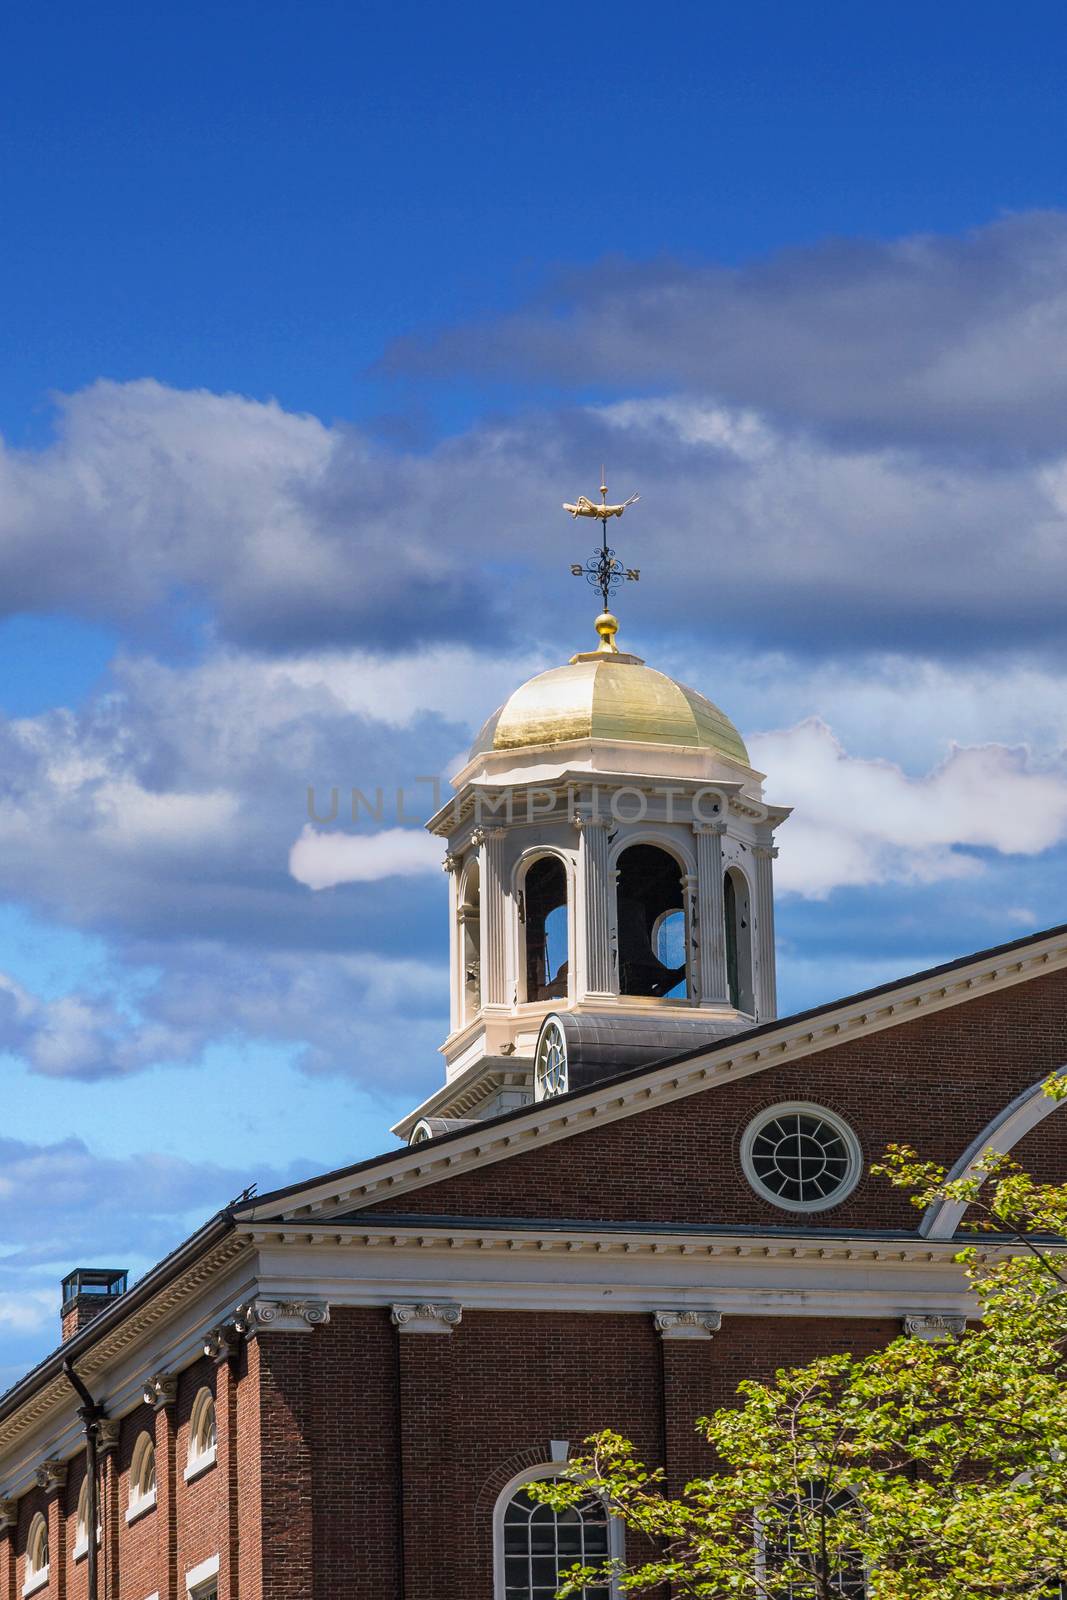 Gold Dome on Bell Tower by dbvirago